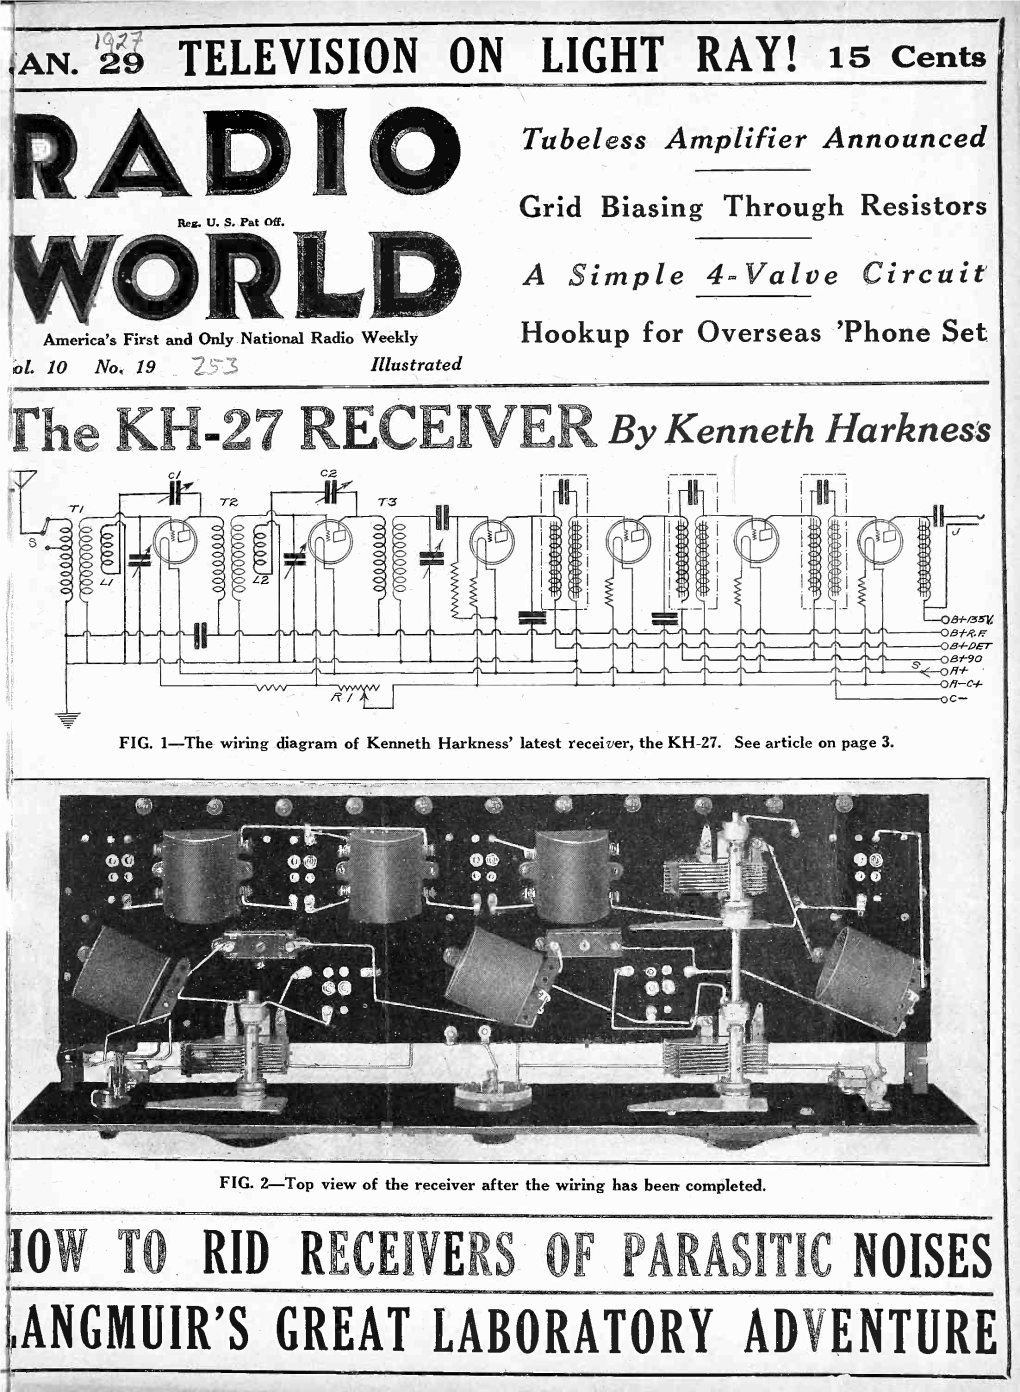 The KH-27 RECEIVER by Kenneth Harkness